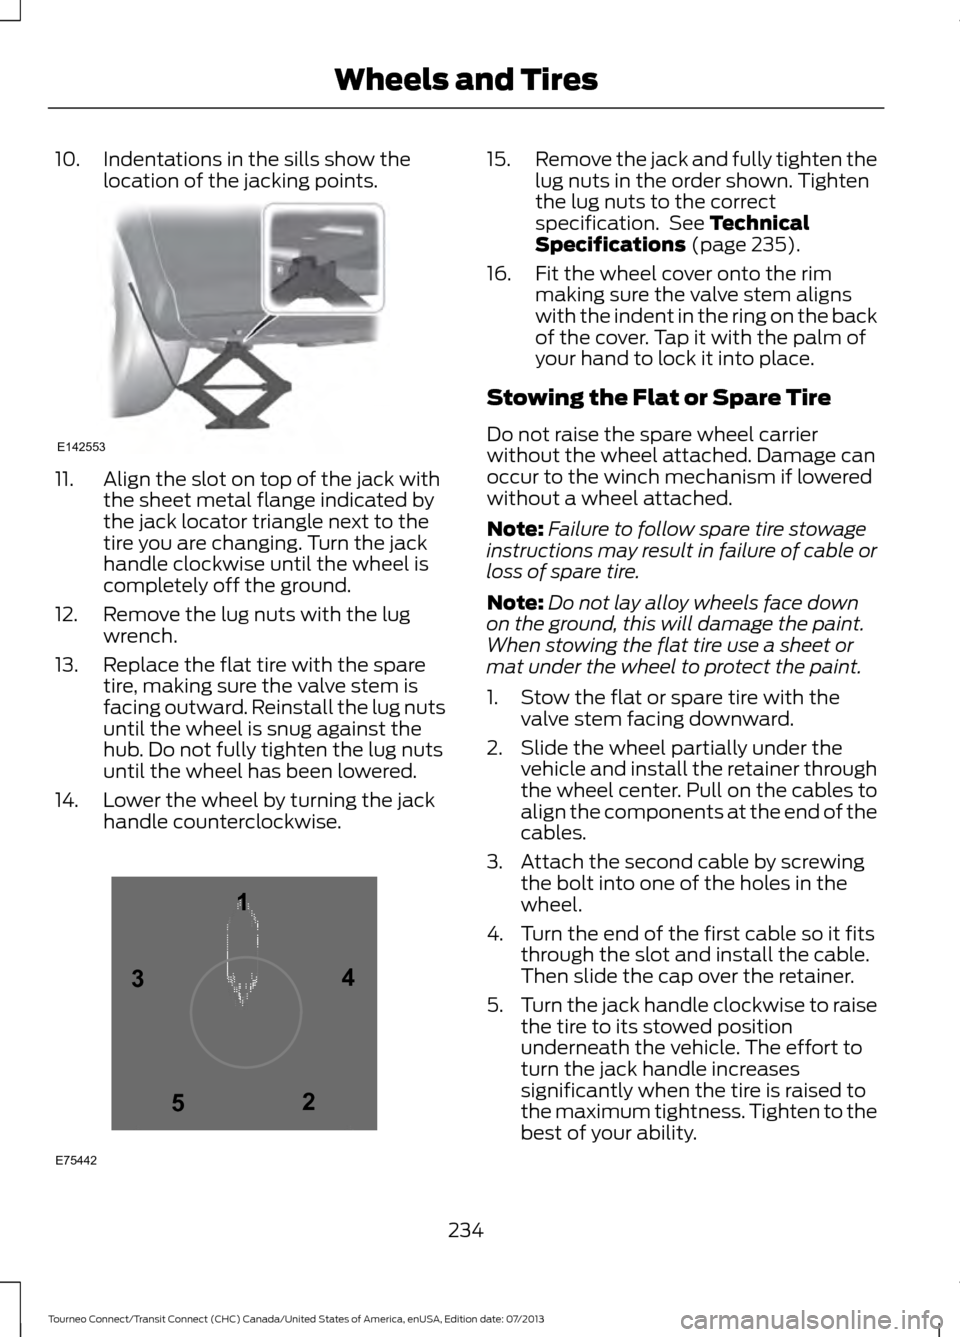 FORD TRANSIT CONNECT 2014 2.G Owners Manual 10. Indentations in the sills show the
location of the jacking points.11. Align the slot on top of the jack with
the sheet metal flange indicated by
the jack locator triangle next to the
tire you are 